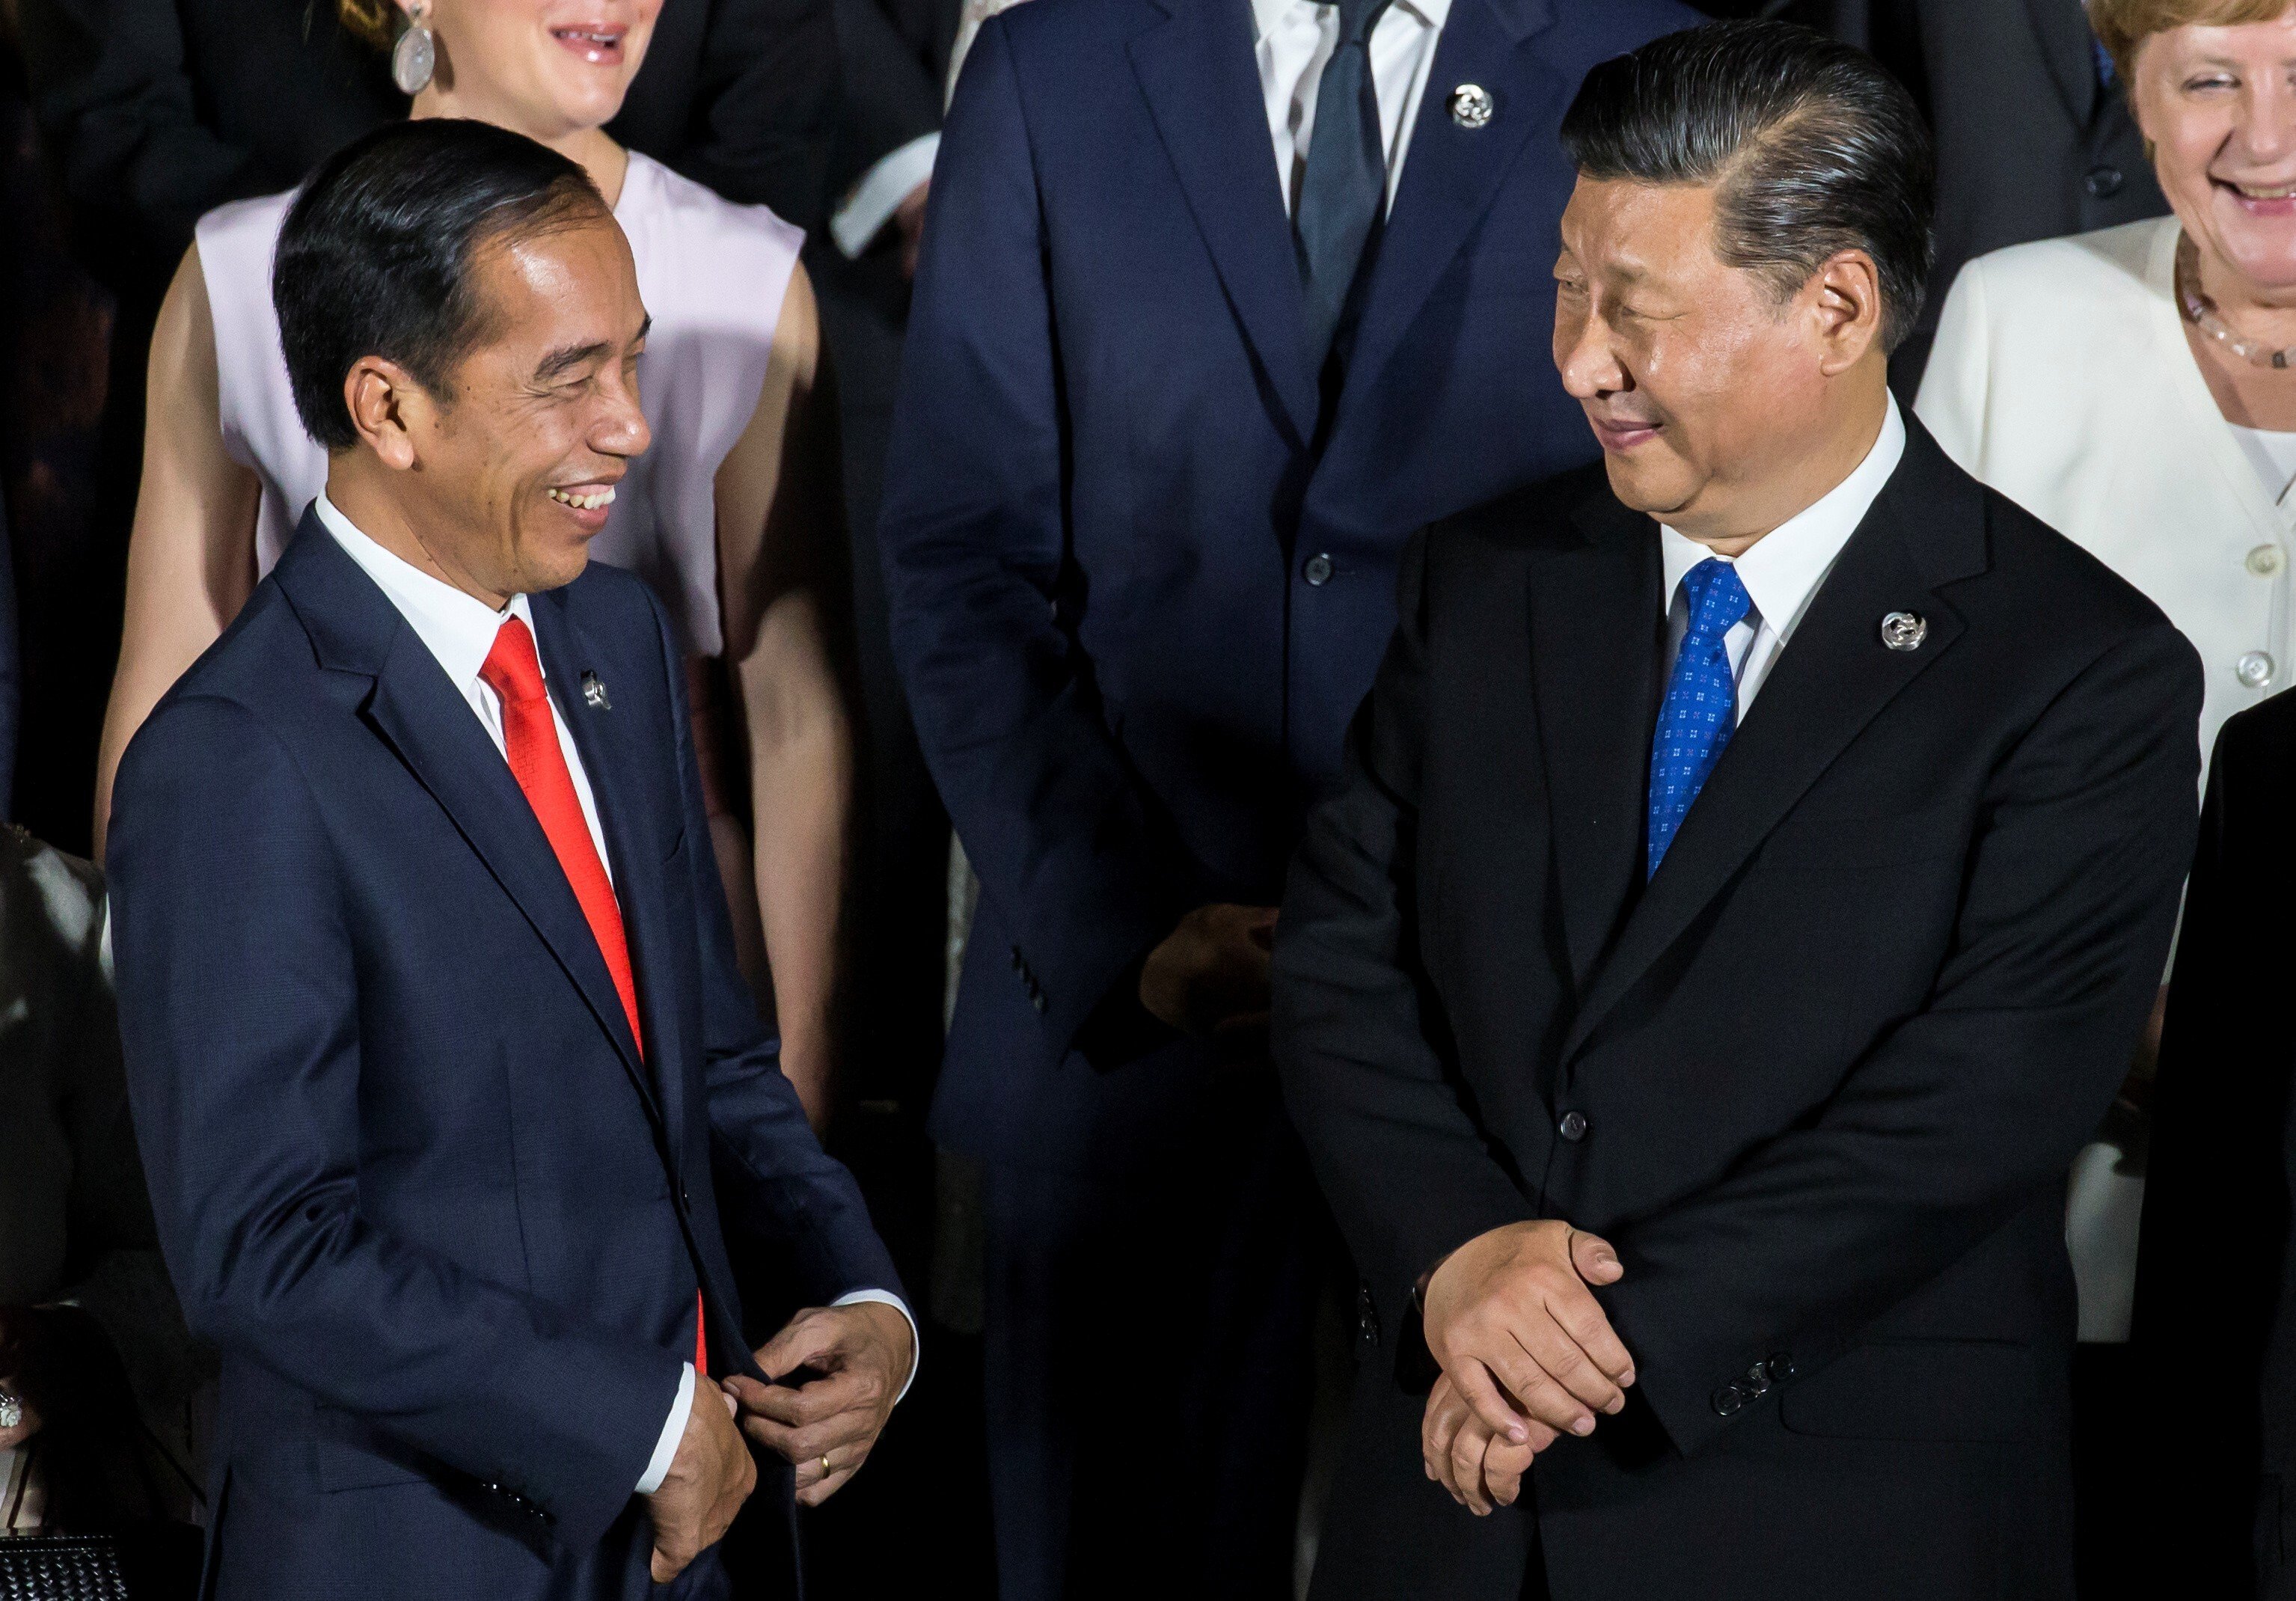 Indonesia’s President Joko Widodo and China’s President Xi Jinping at the G20 summit in Osaka in June 2019. Photo: Reuters